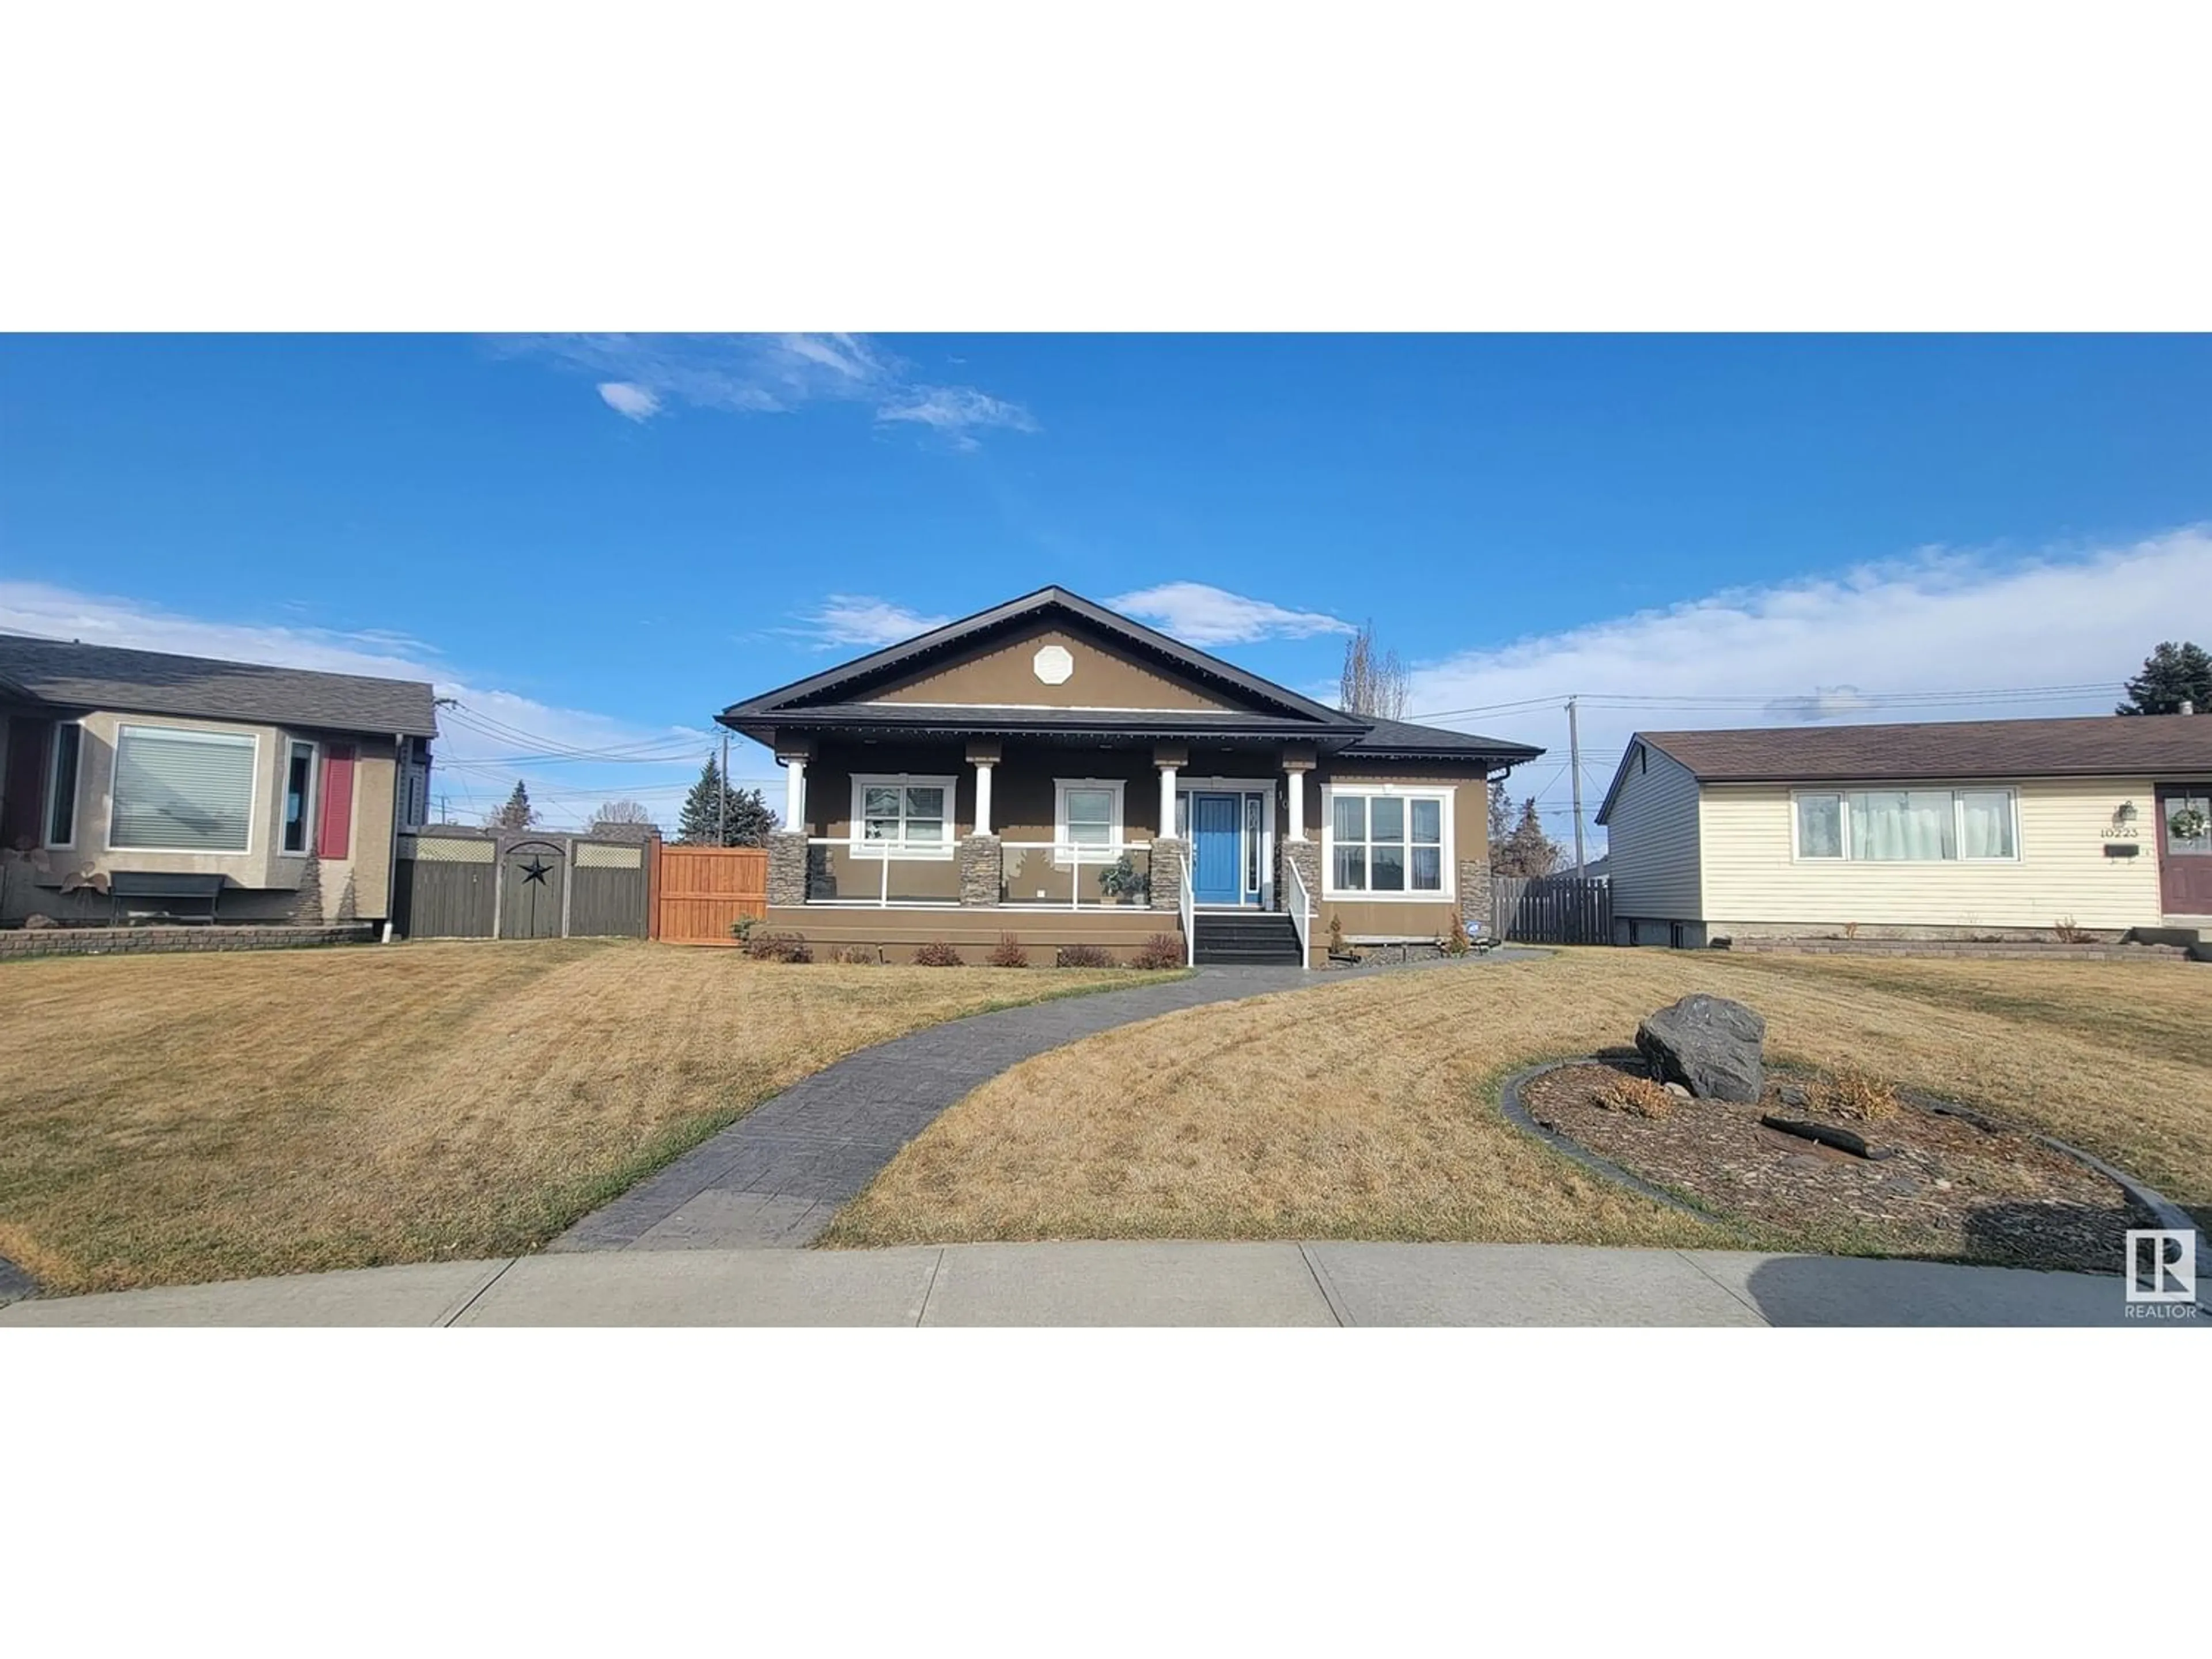 Frontside or backside of a home for 10227 52 ST NW, Edmonton Alberta T6A2G2